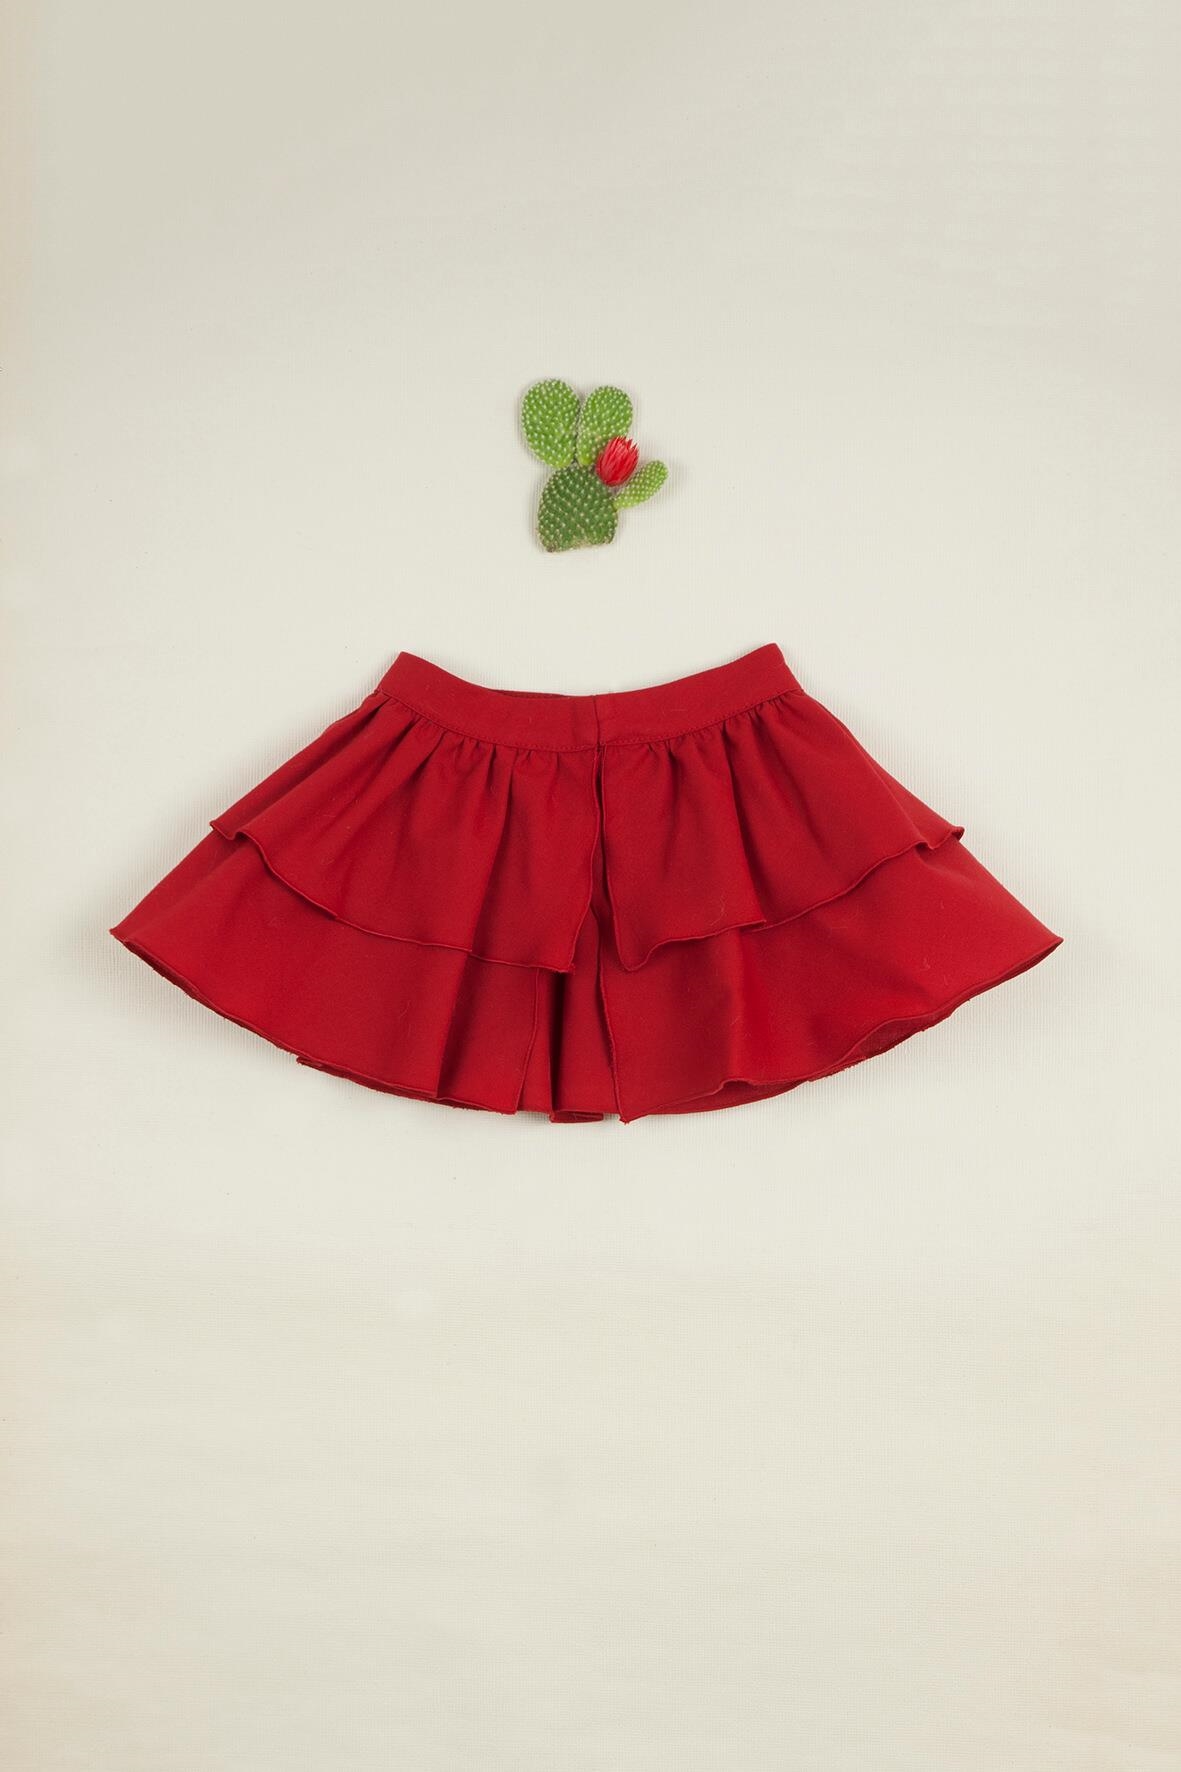 Mod.35.1 Red collar with frill | AW19.20.Mod.35.1 Red collar with frill | 1